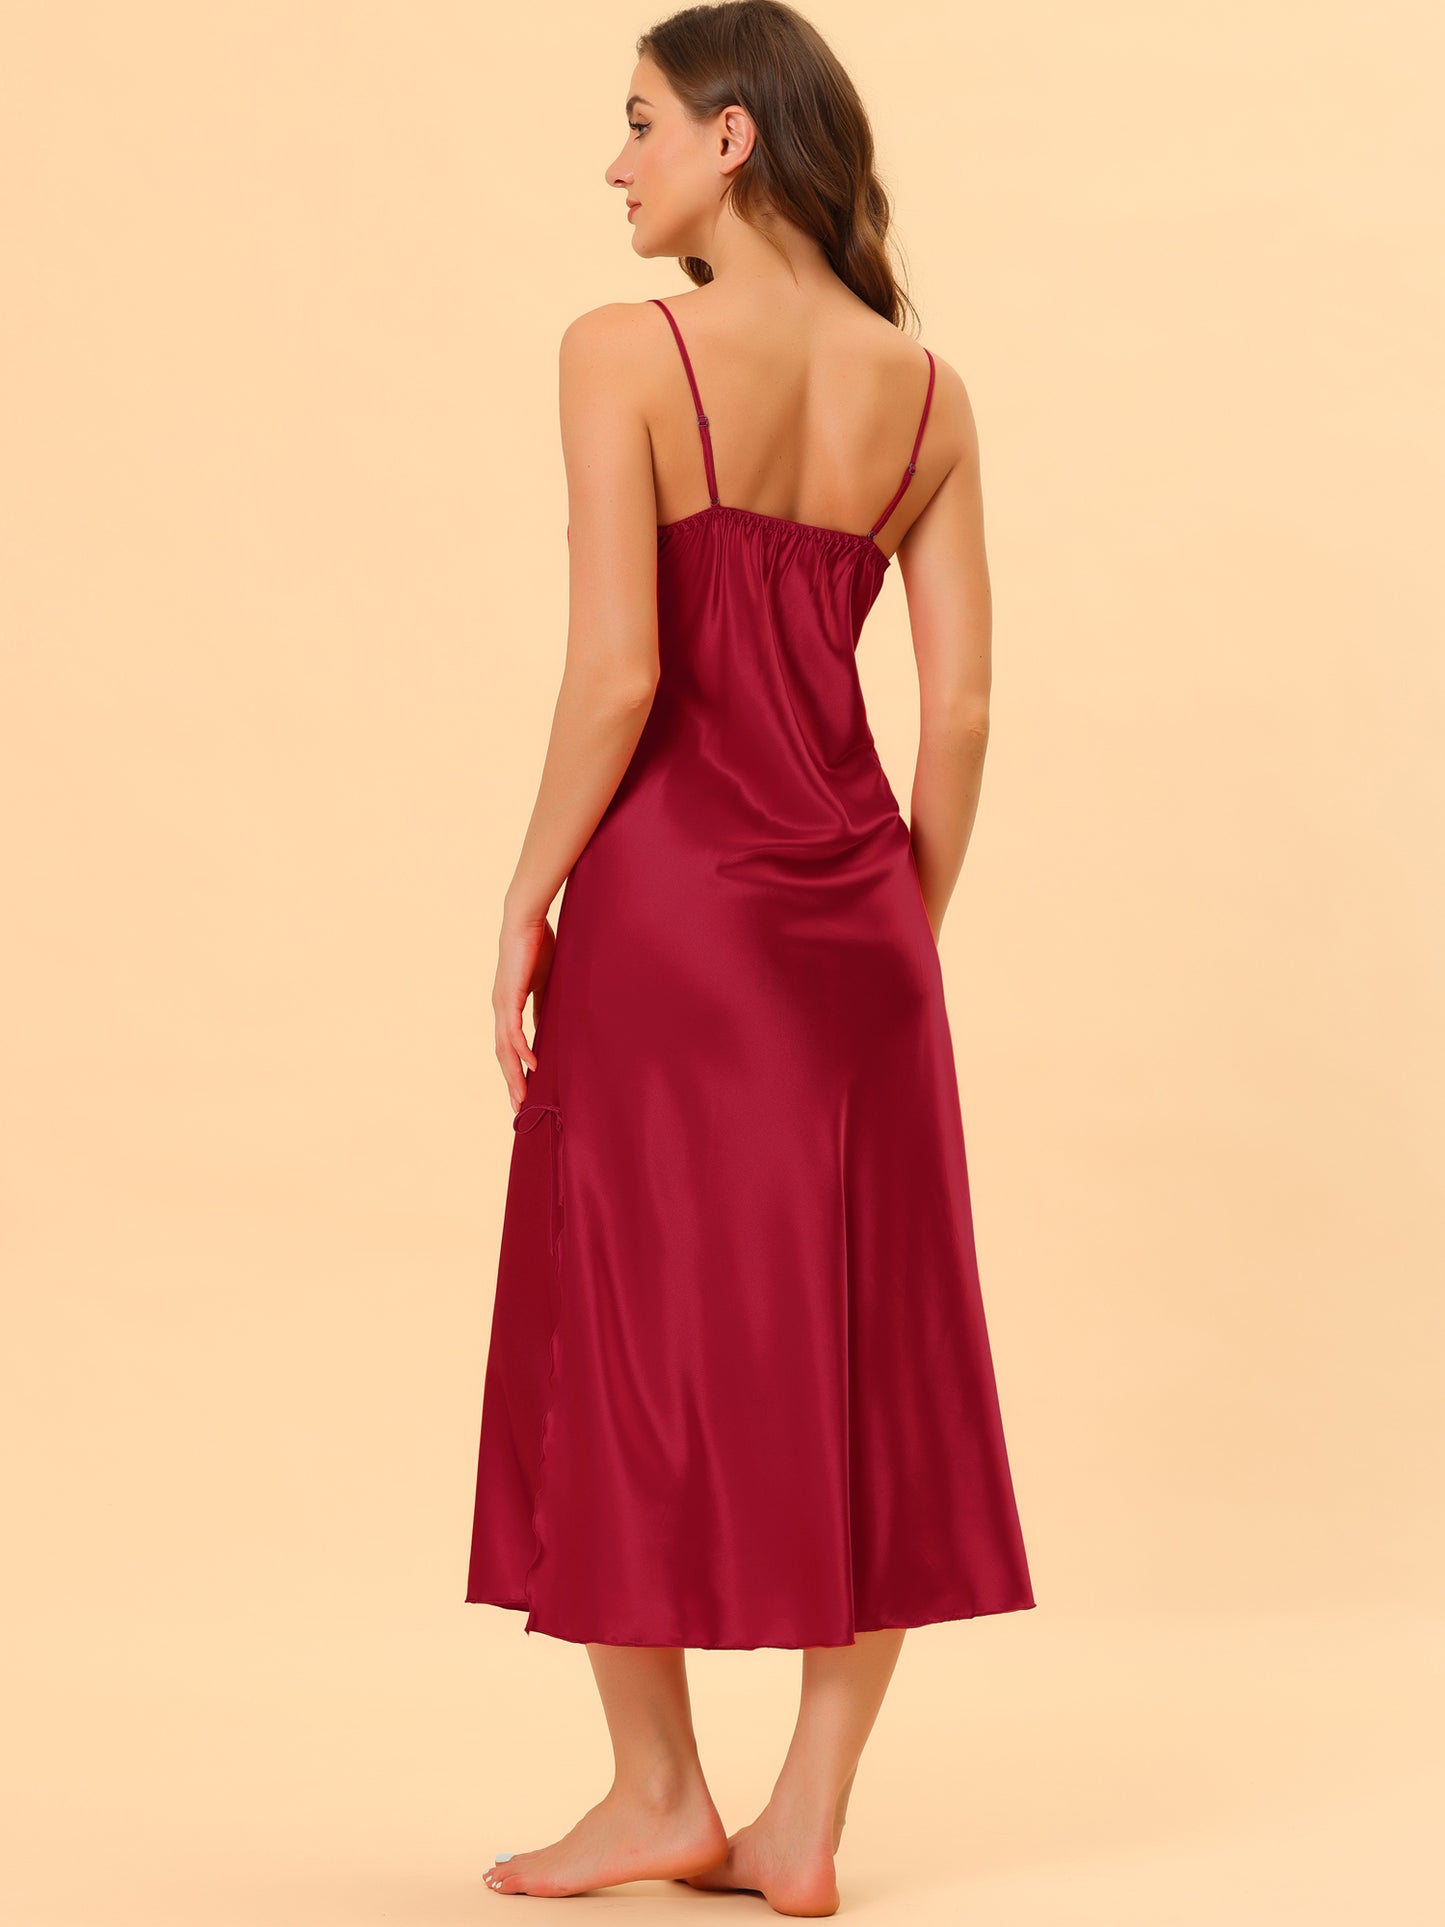 cheibear Satin Slip Dress Chemise Silky Lounge Camisole Maxi Nightgowns Wine Red